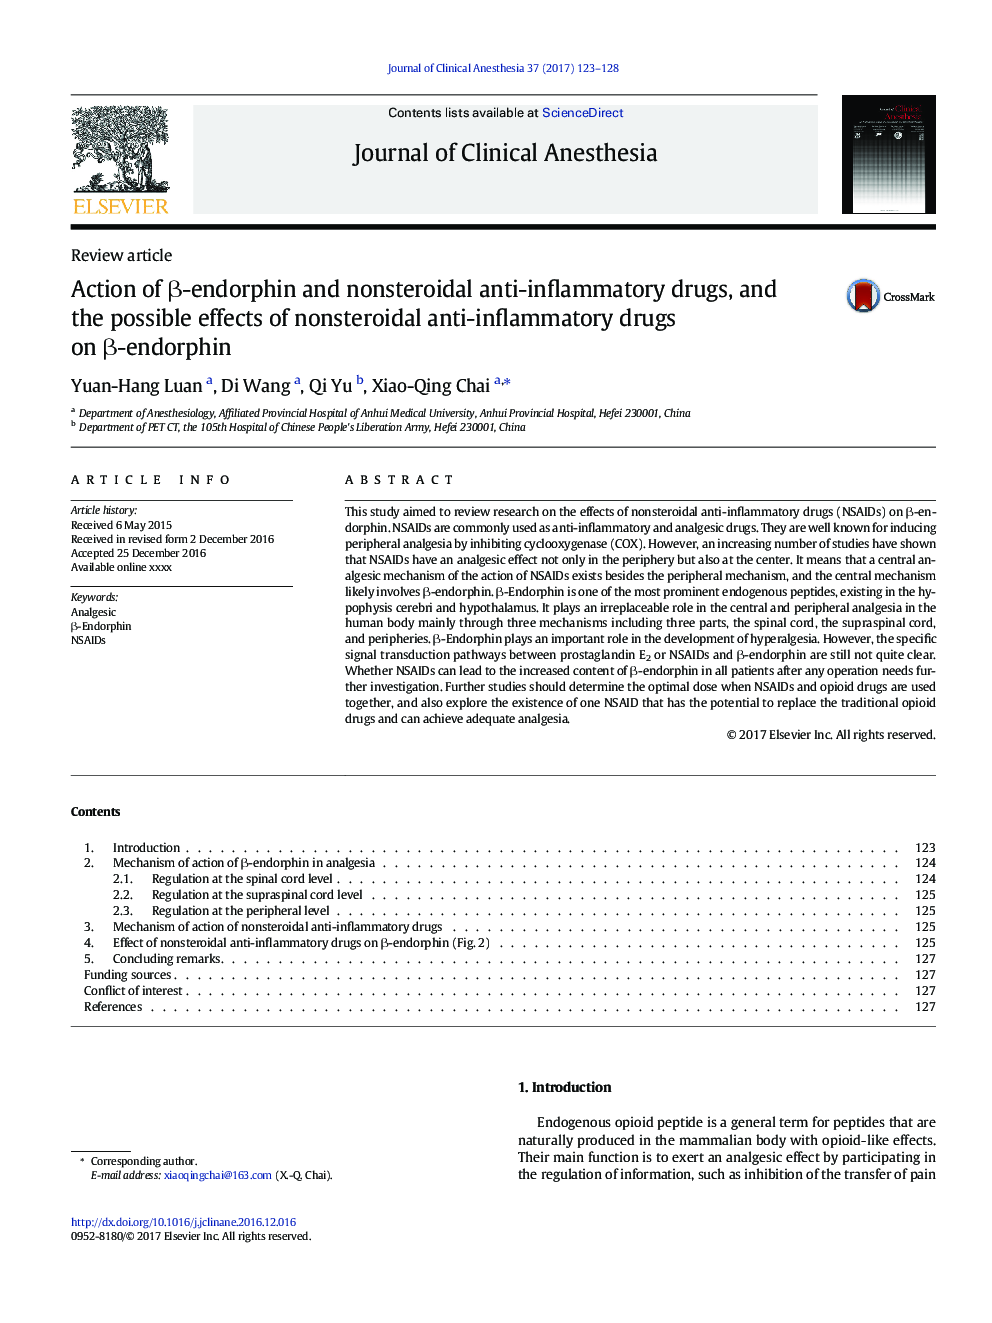 Action of Î²-endorphin and nonsteroidal anti-inflammatory drugs, and the possible effects of nonsteroidal anti-inflammatory drugs on Î²-endorphin